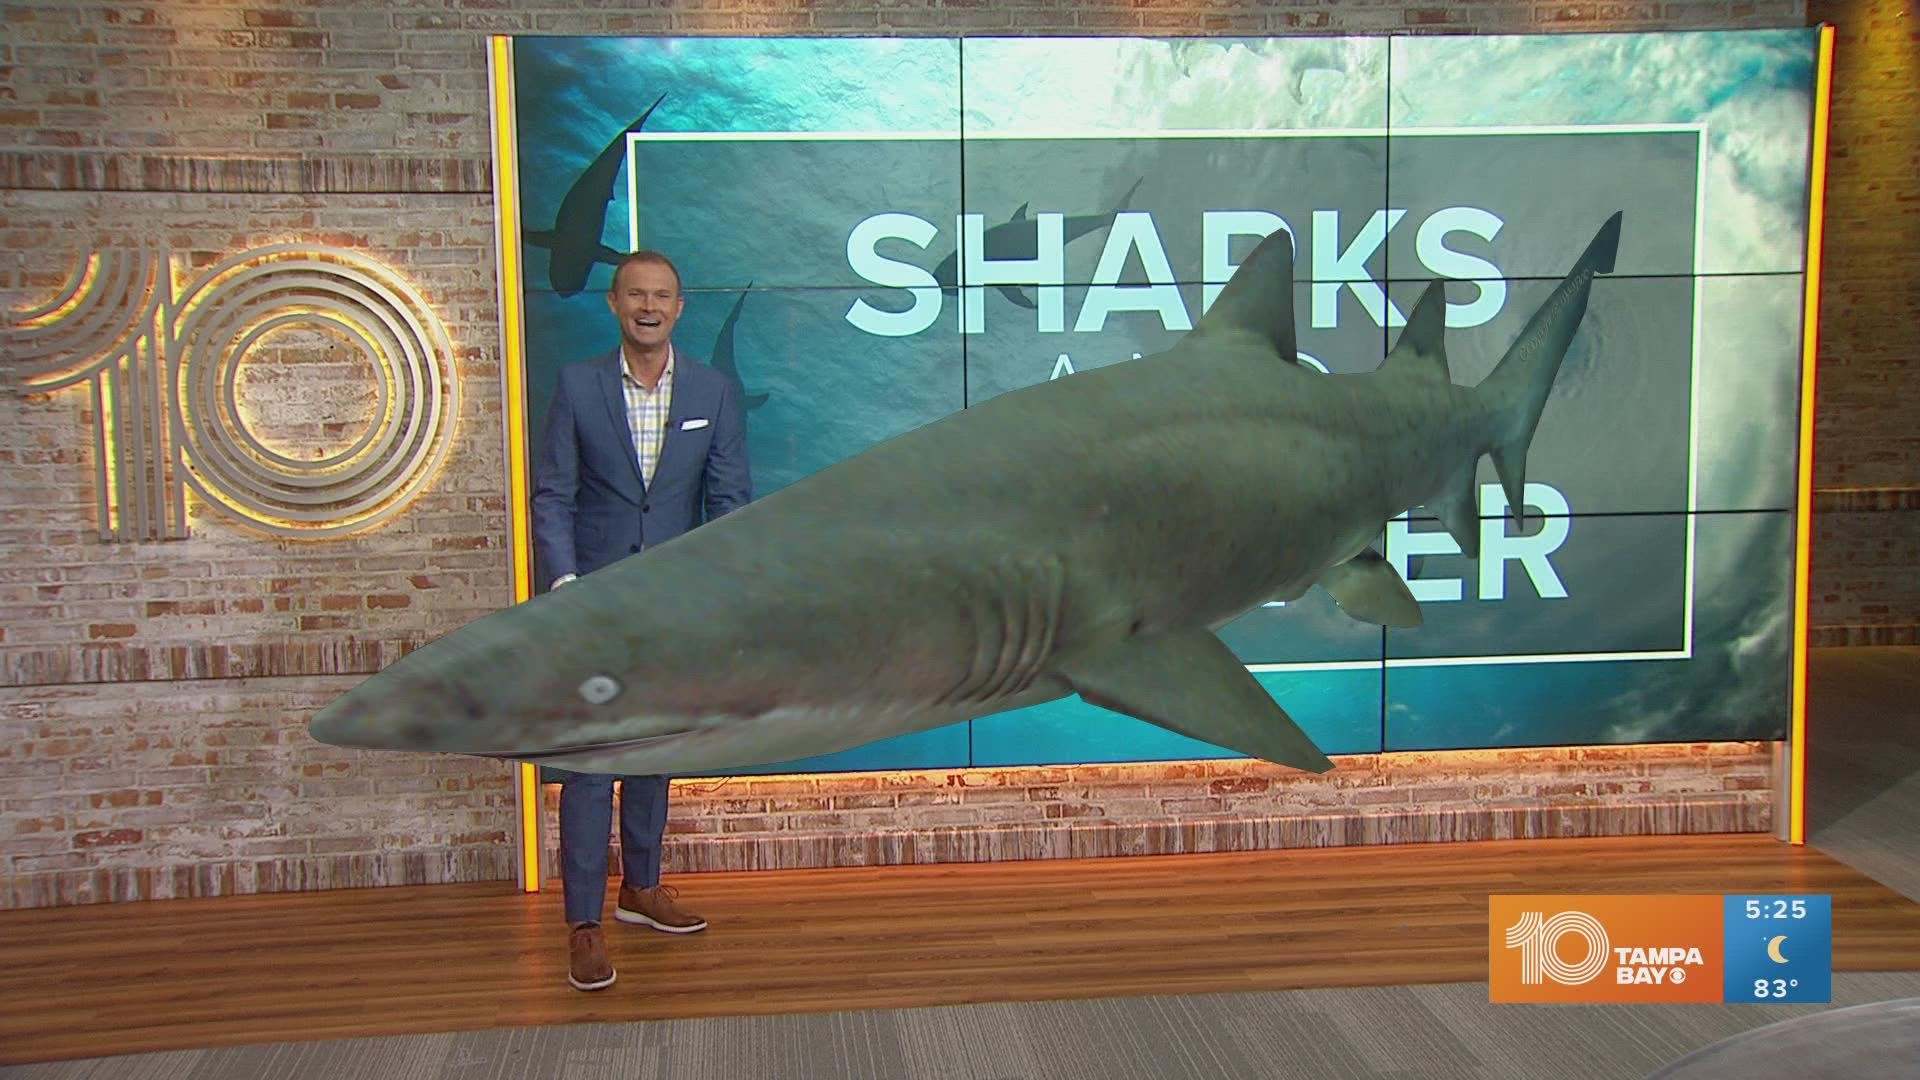 A shark's heightened senses can actually help them detect hurricanes. 10 Tampa Bay Meteorologist Grant Gilmore explains how sharks can detect weather events.